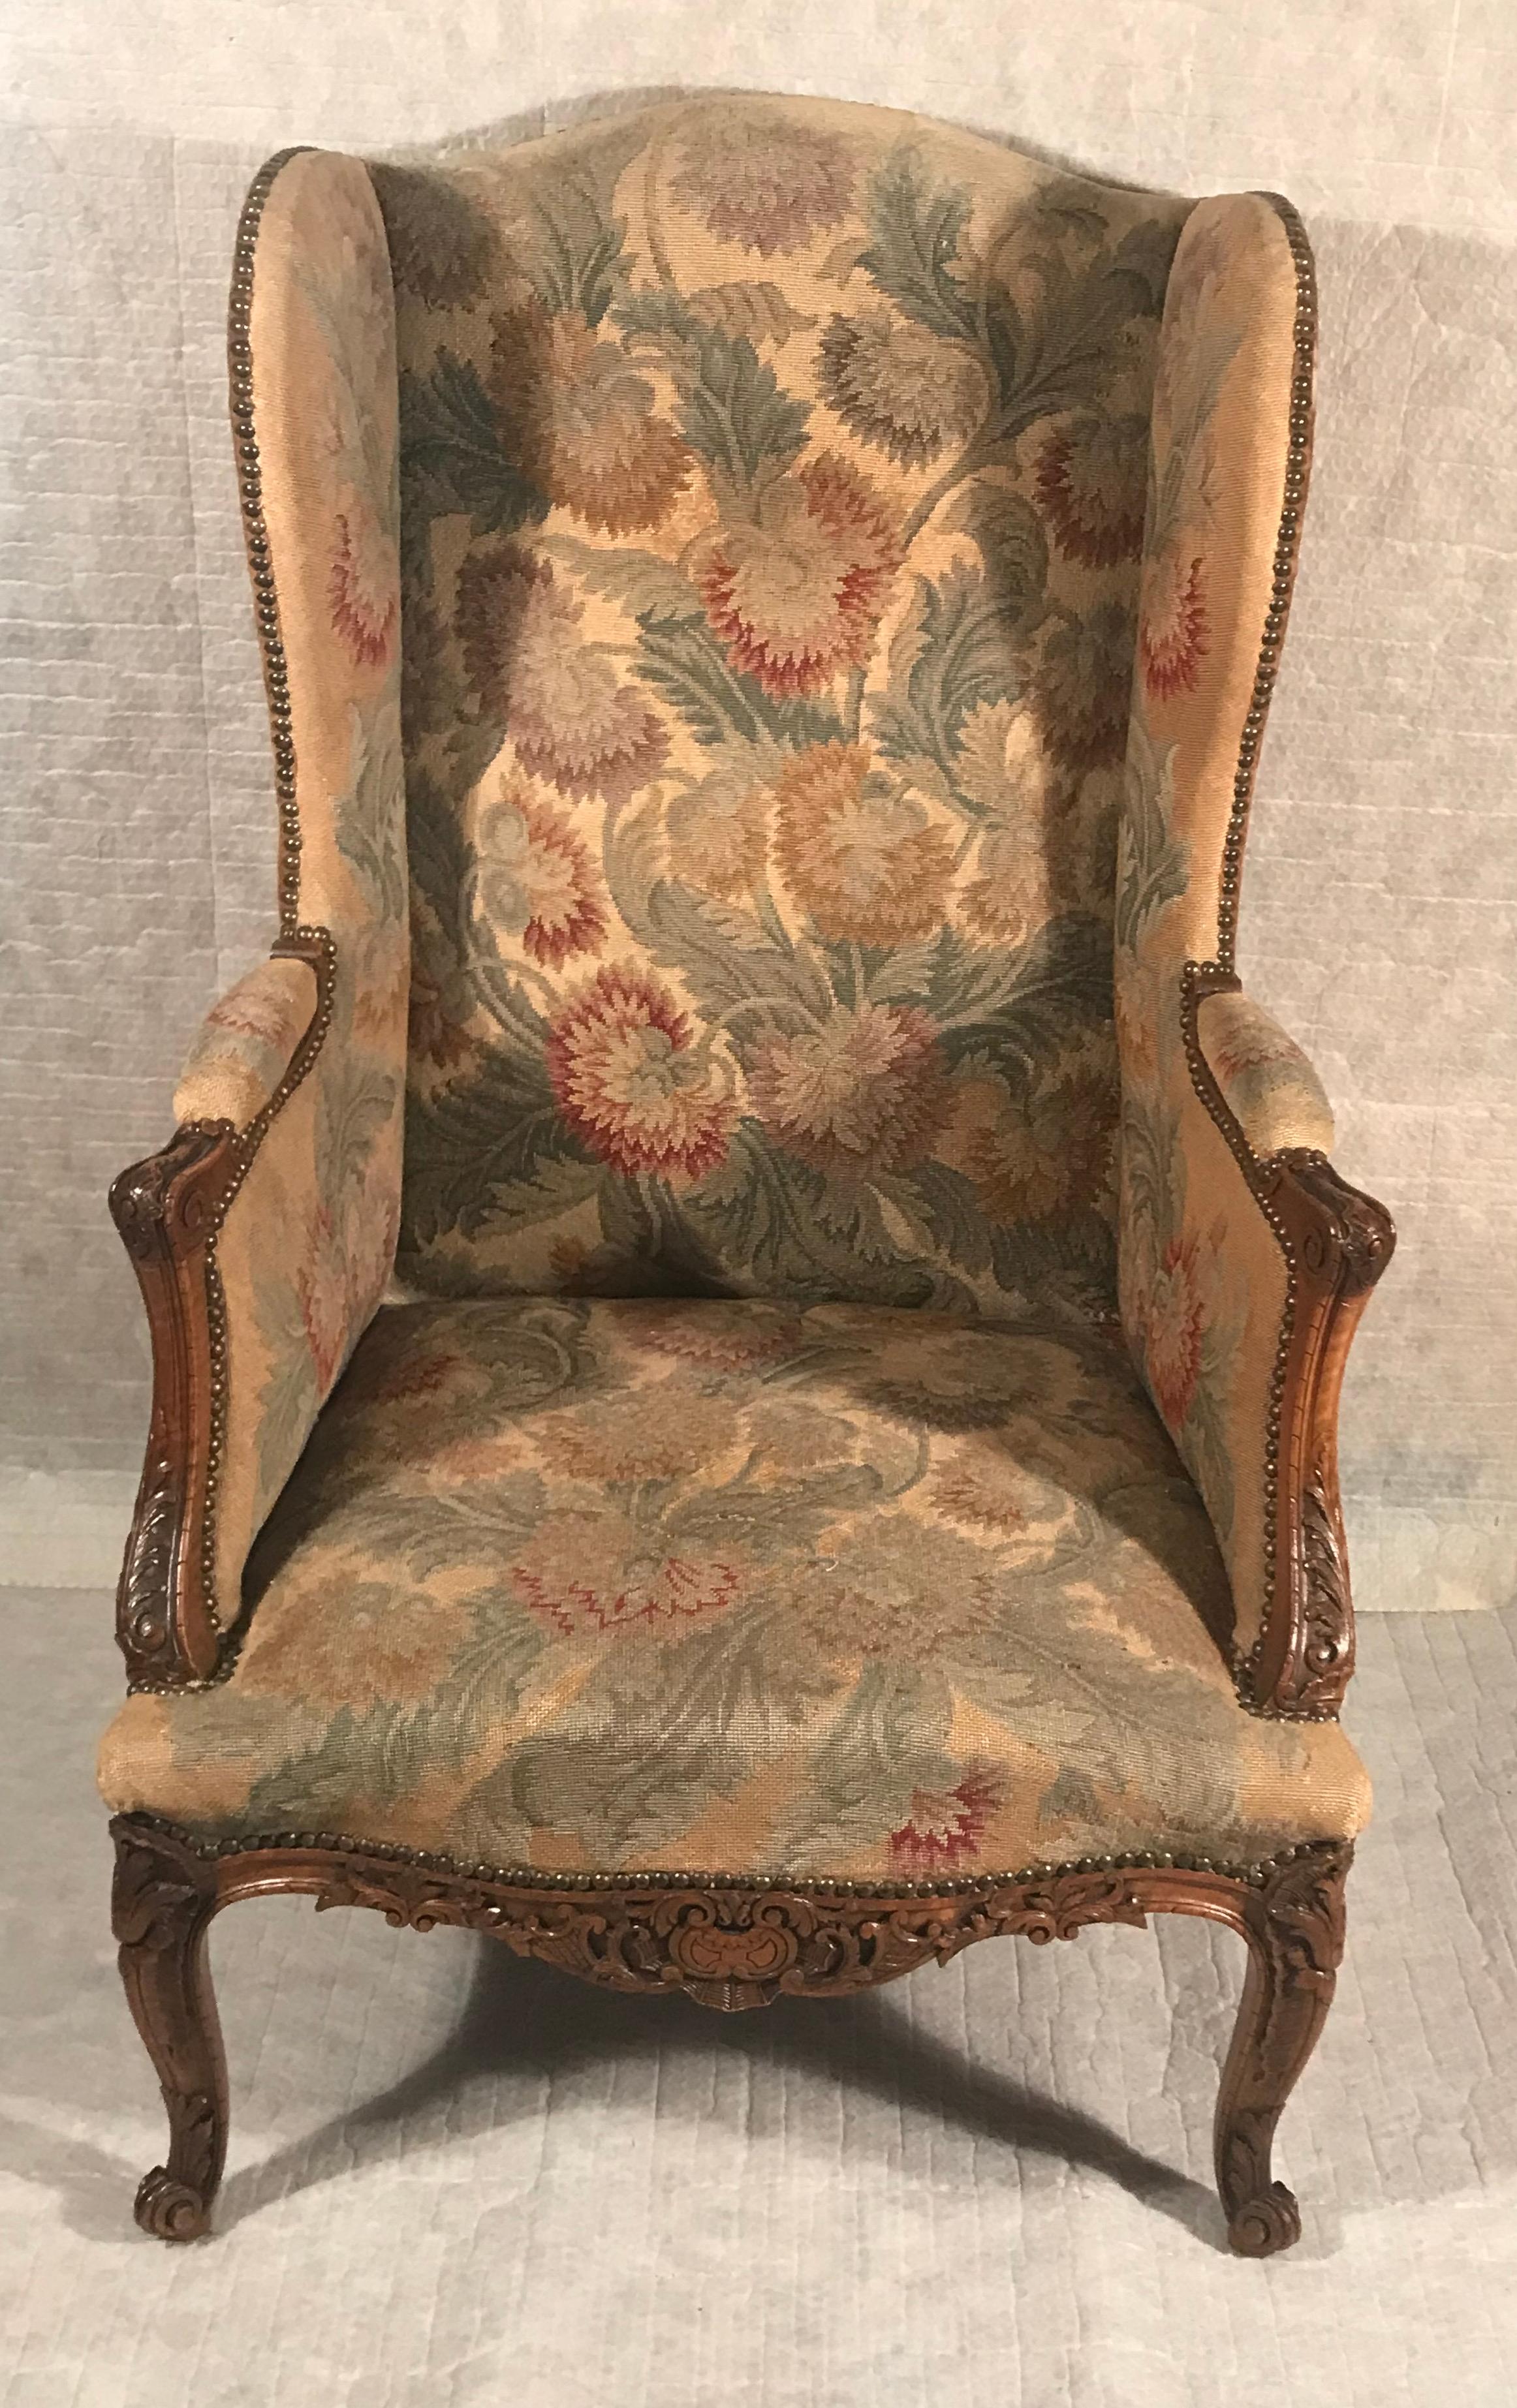 Introducing an exquisite Baroque wingback armchair that transports you back to the elegance of the 18th century. This remarkable piece, originating from Germany around 1760, showcases the grandeur and craftsmanship of the Baroque era.  Crafted with